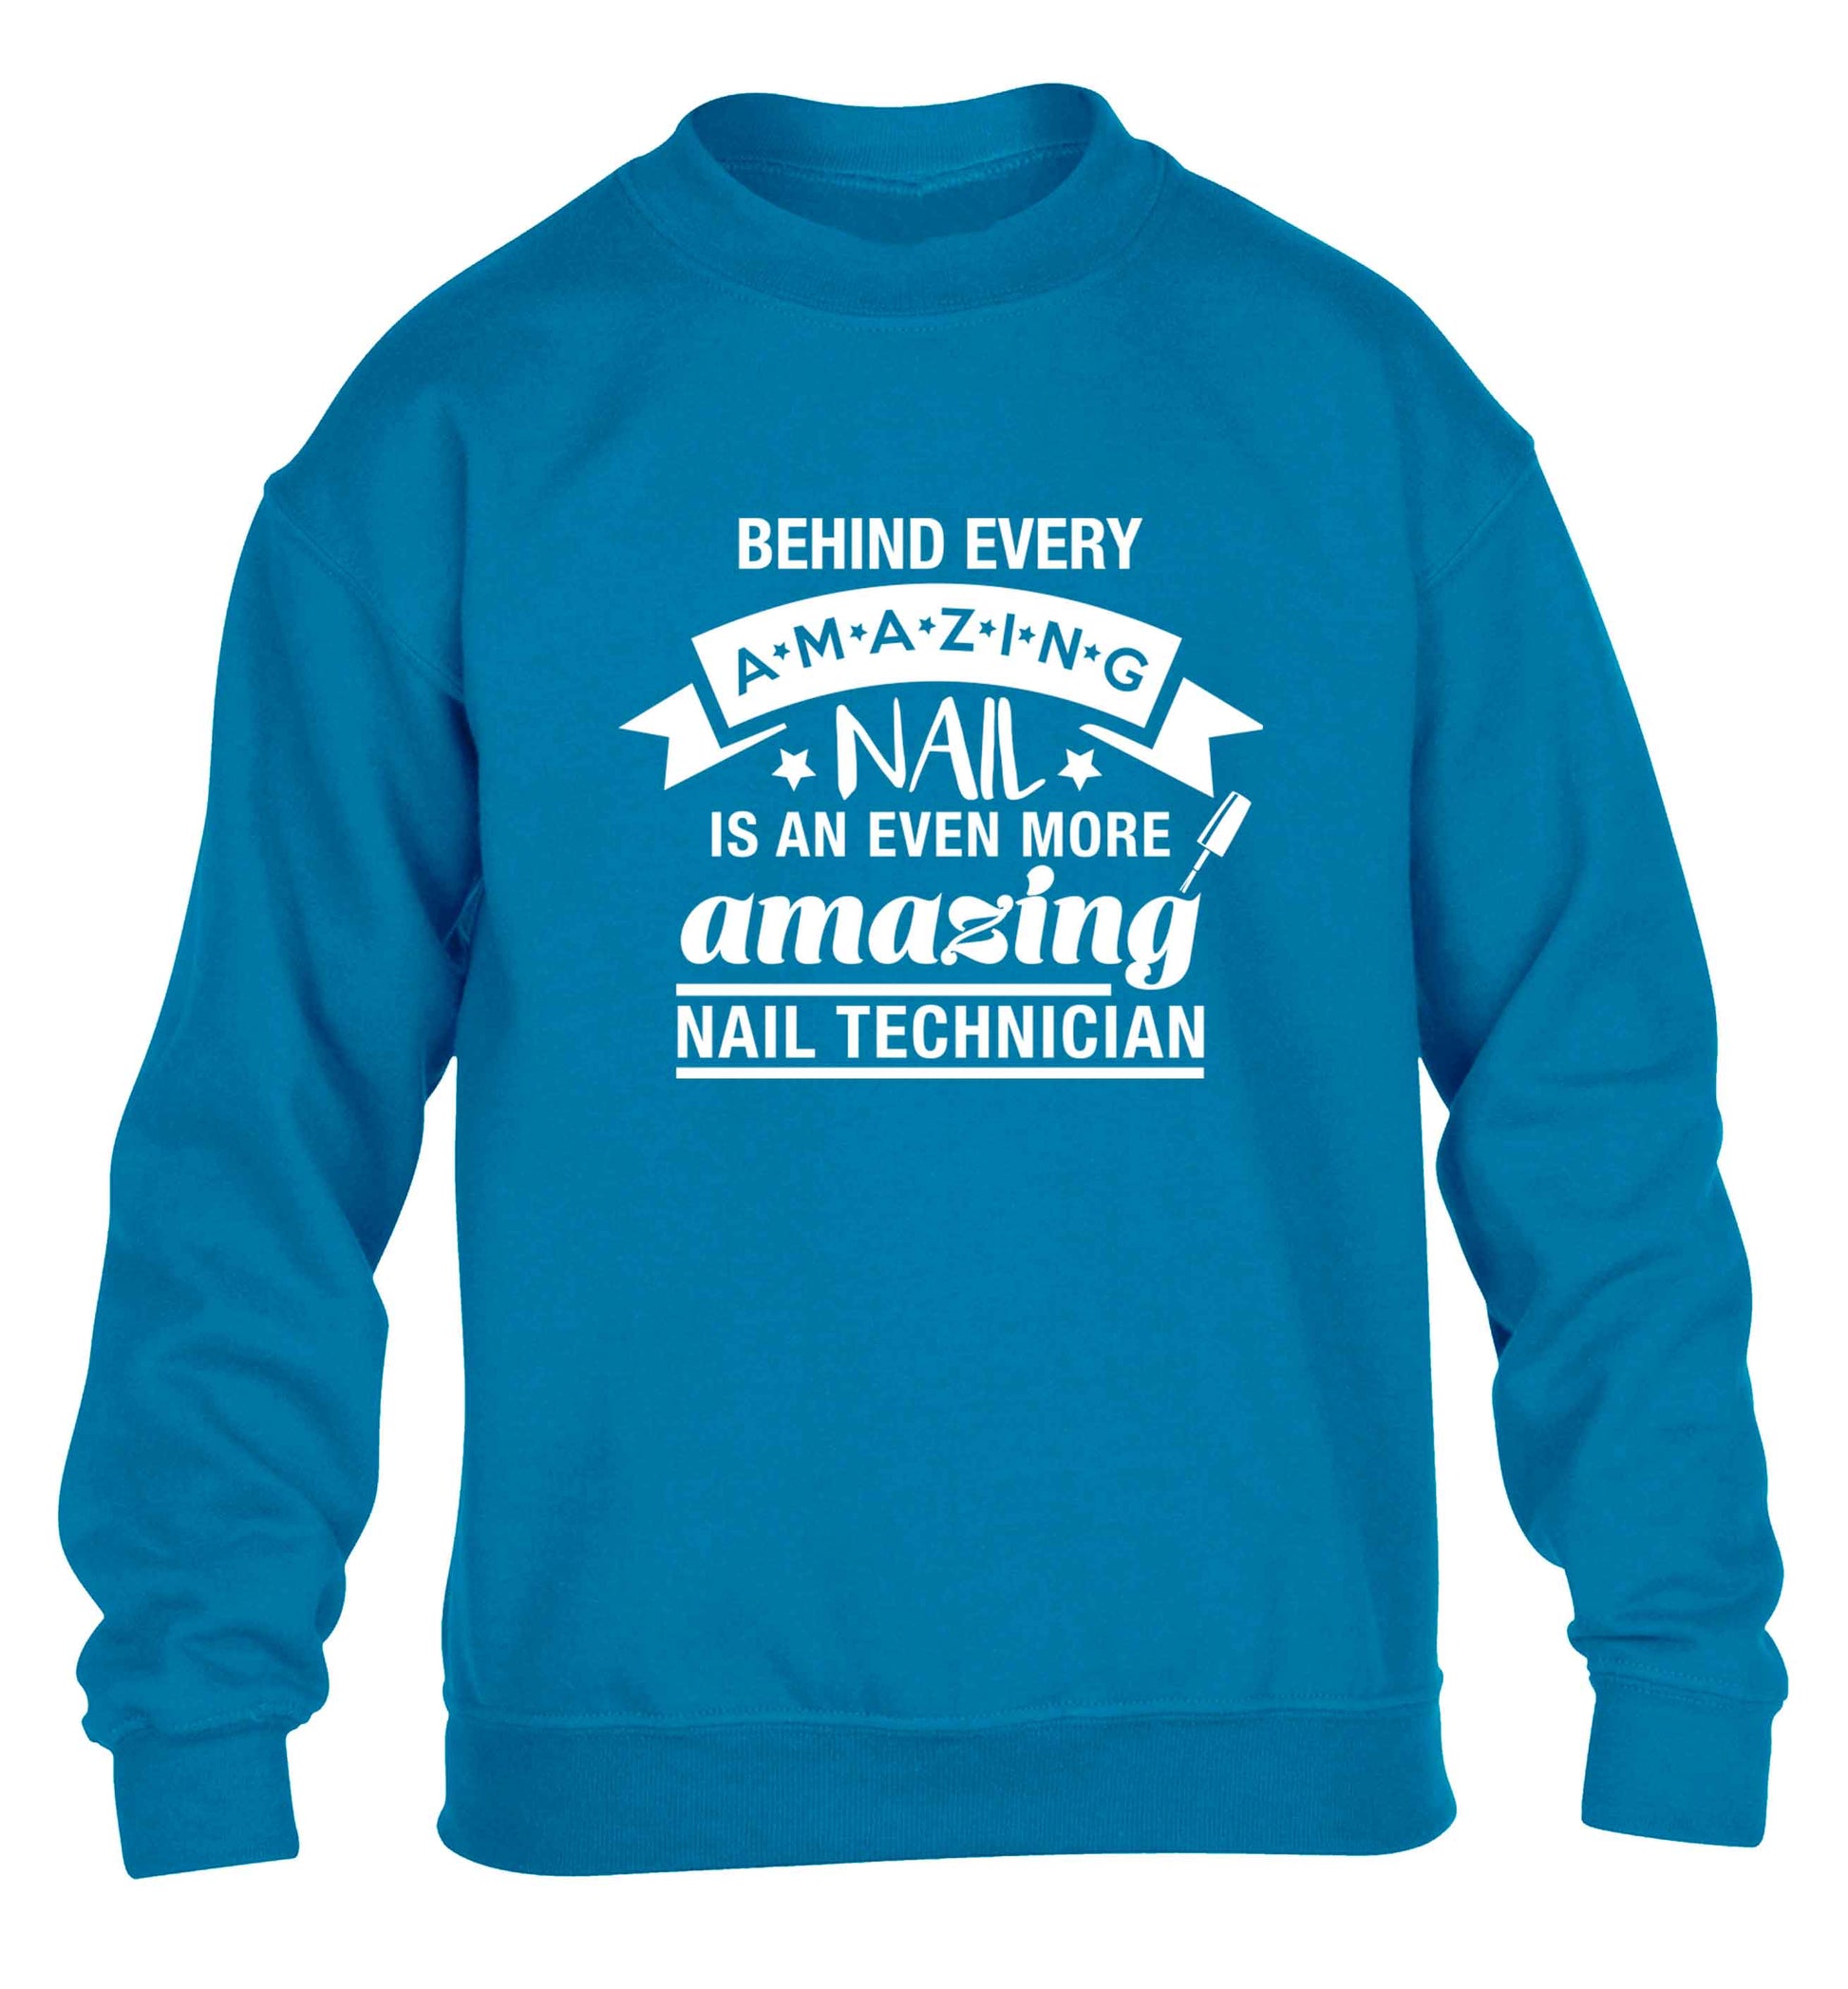 Behind every amazing nail is an even more amazing nail technician children's blue sweater 12-13 Years